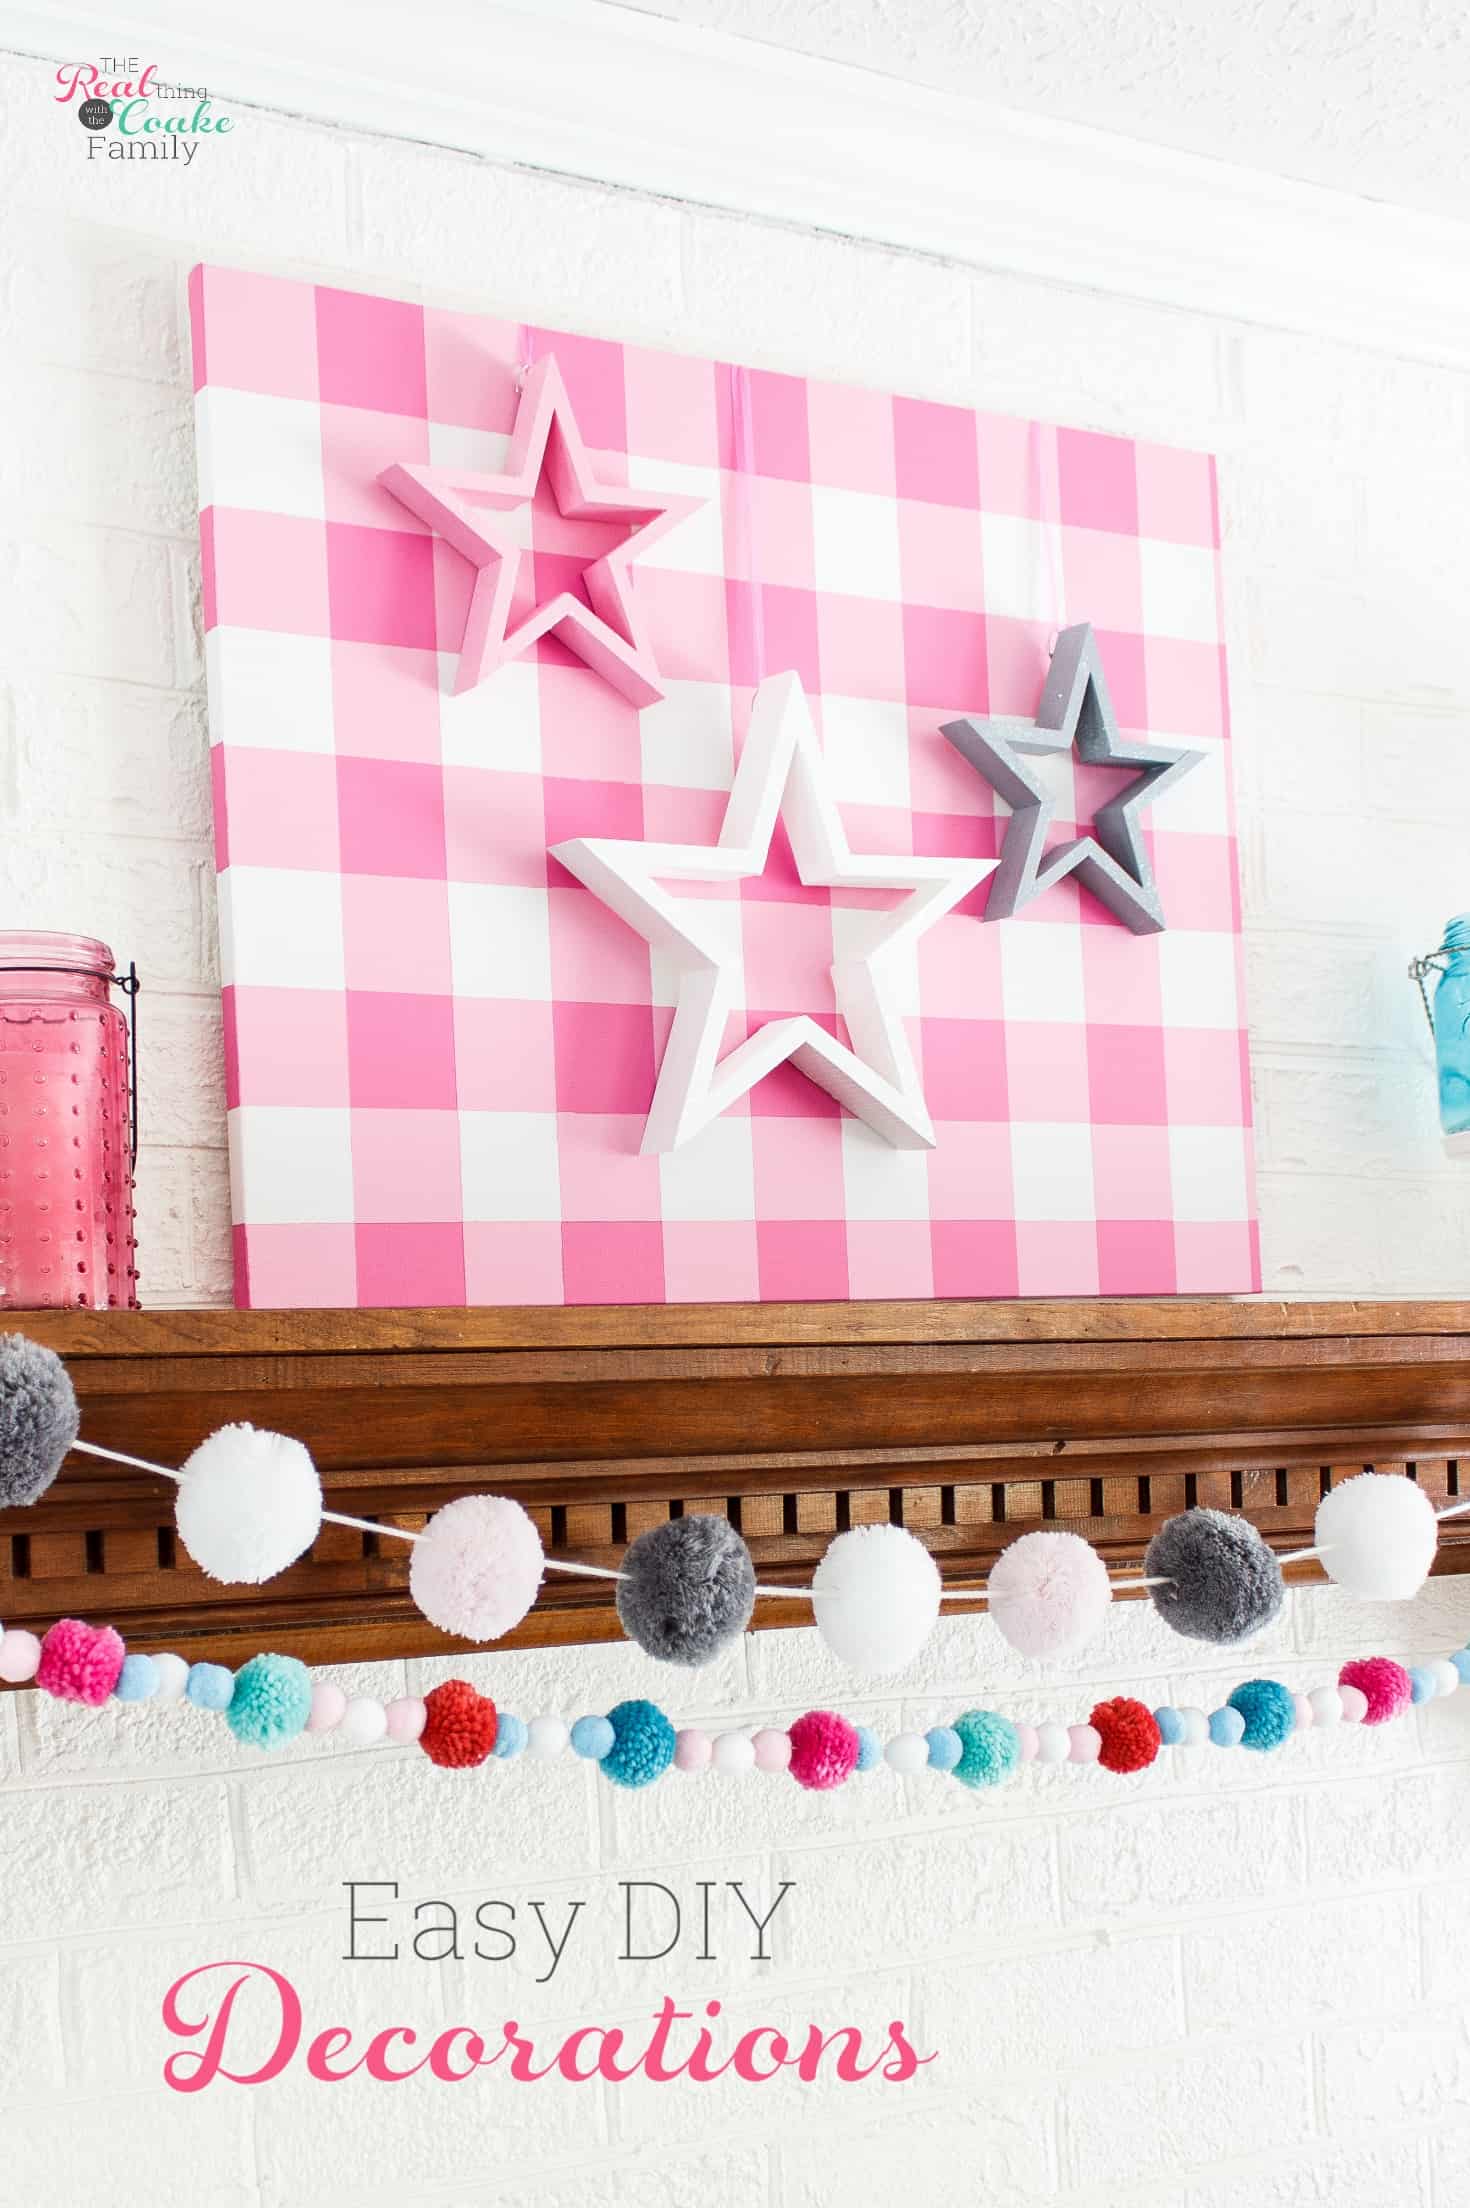 Create With Mom: DecoArt Galaxy Glitter adds sparkle to our projects